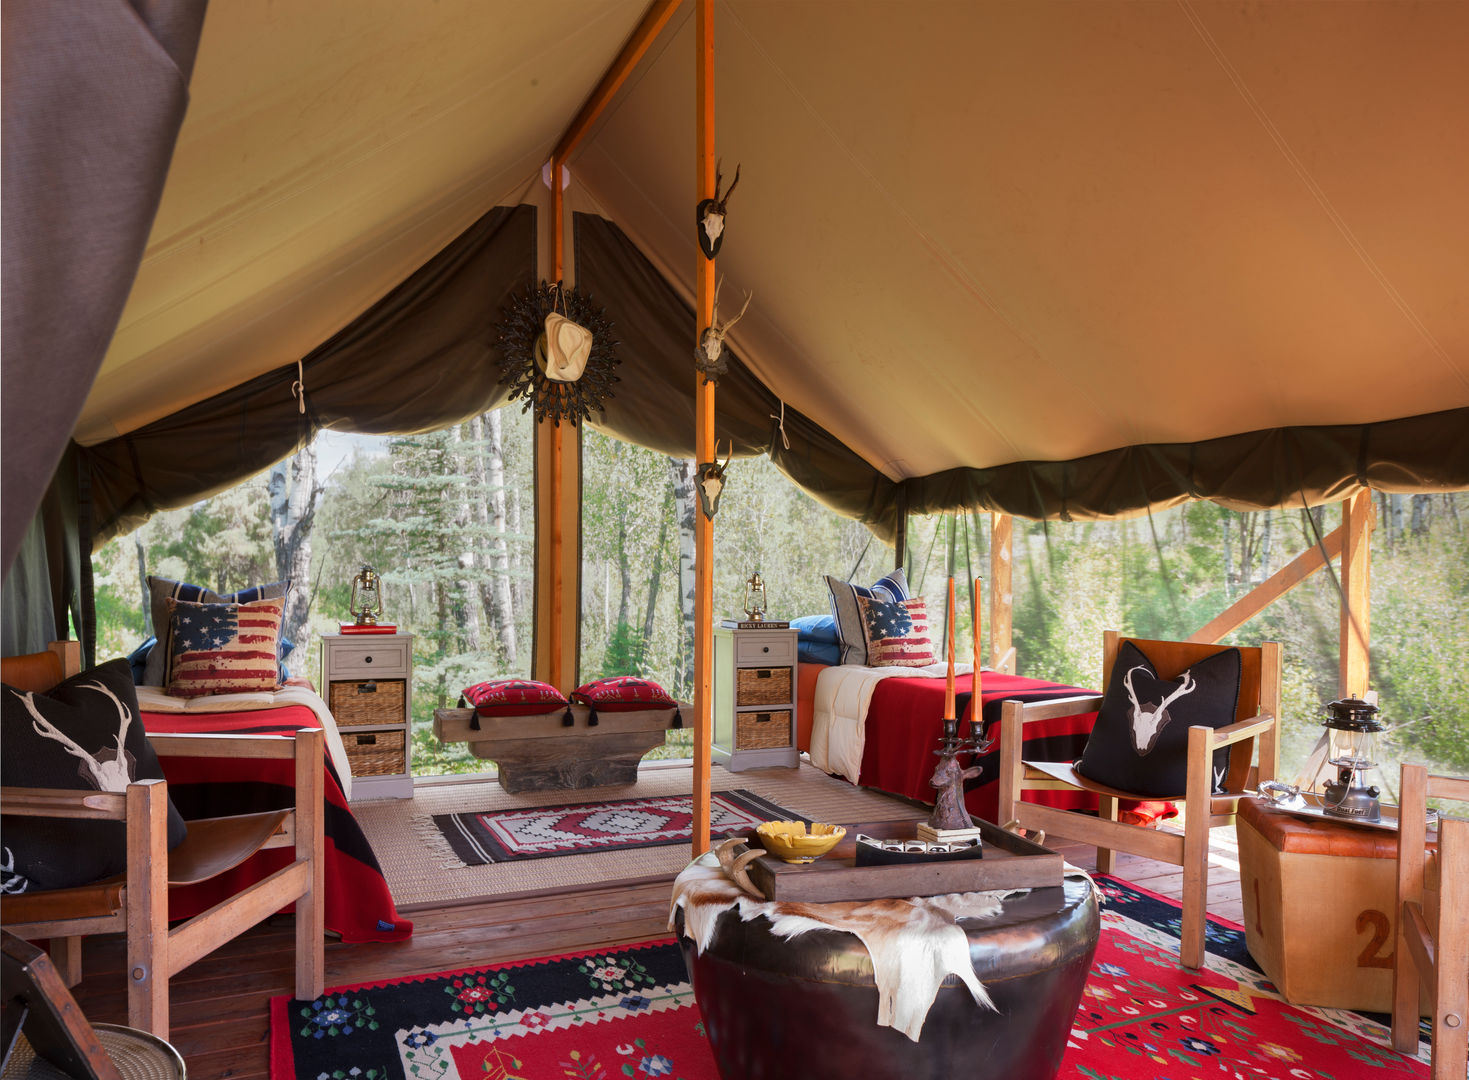 Vail Valley Retreat, Andrea Schumacher Interiors Andrea Schumacher Interiors Patios & Decks glamping,tent,patriotic decor,twin beds,bench,area rugs,cocktail table,'